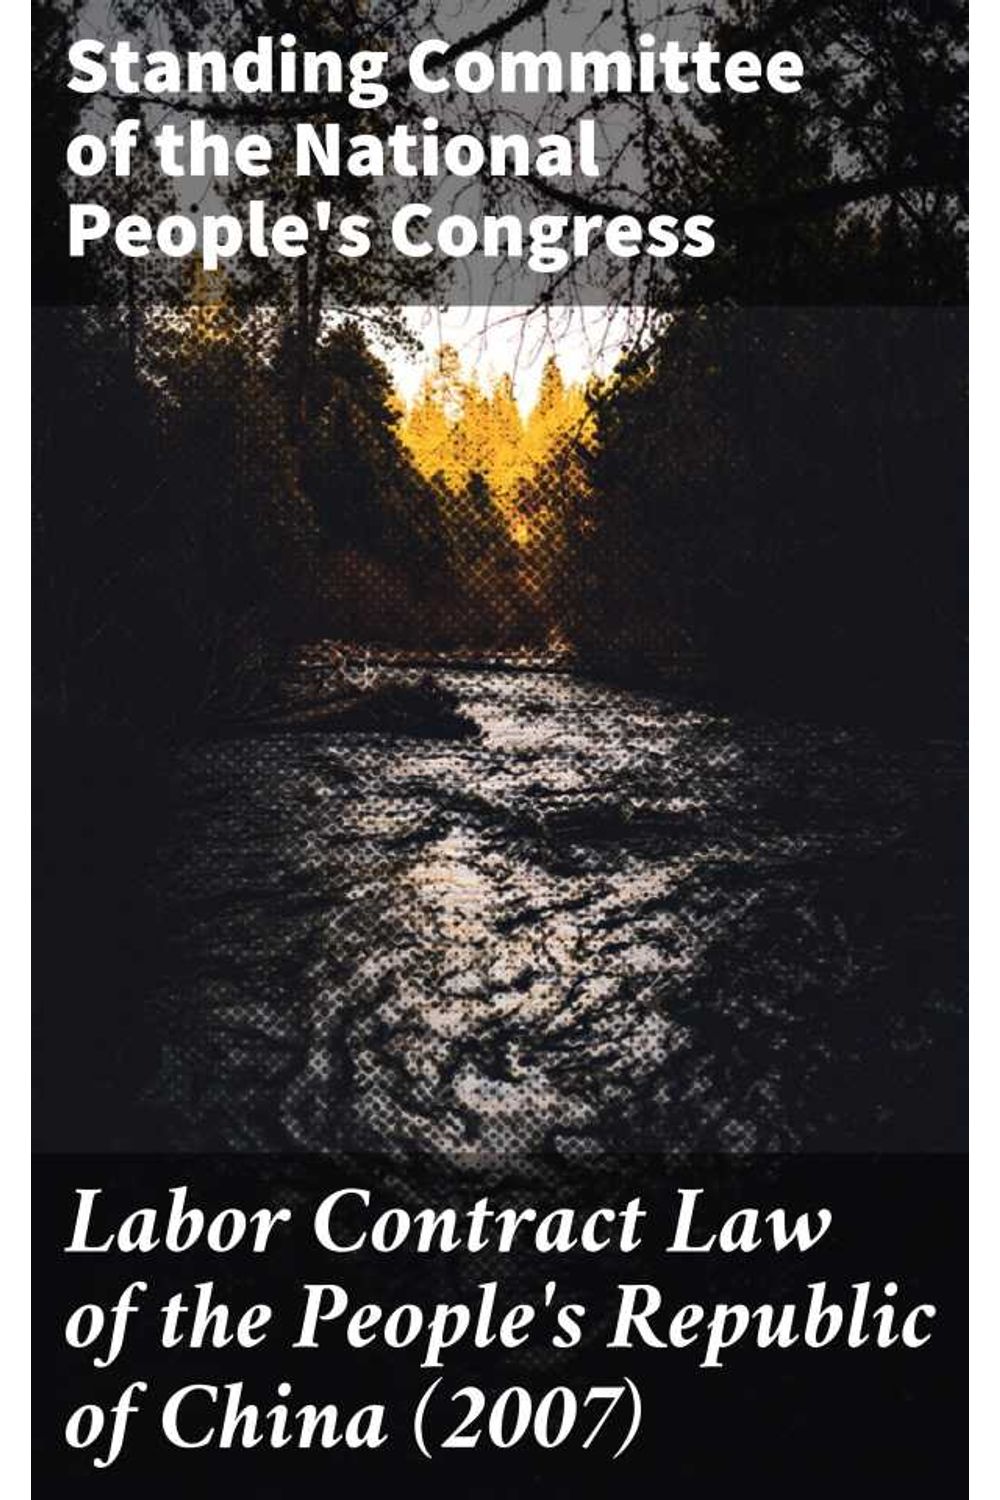 bw-labor-contract-law-of-the-peoples-republic-of-china-2007-good-press-4064066467036